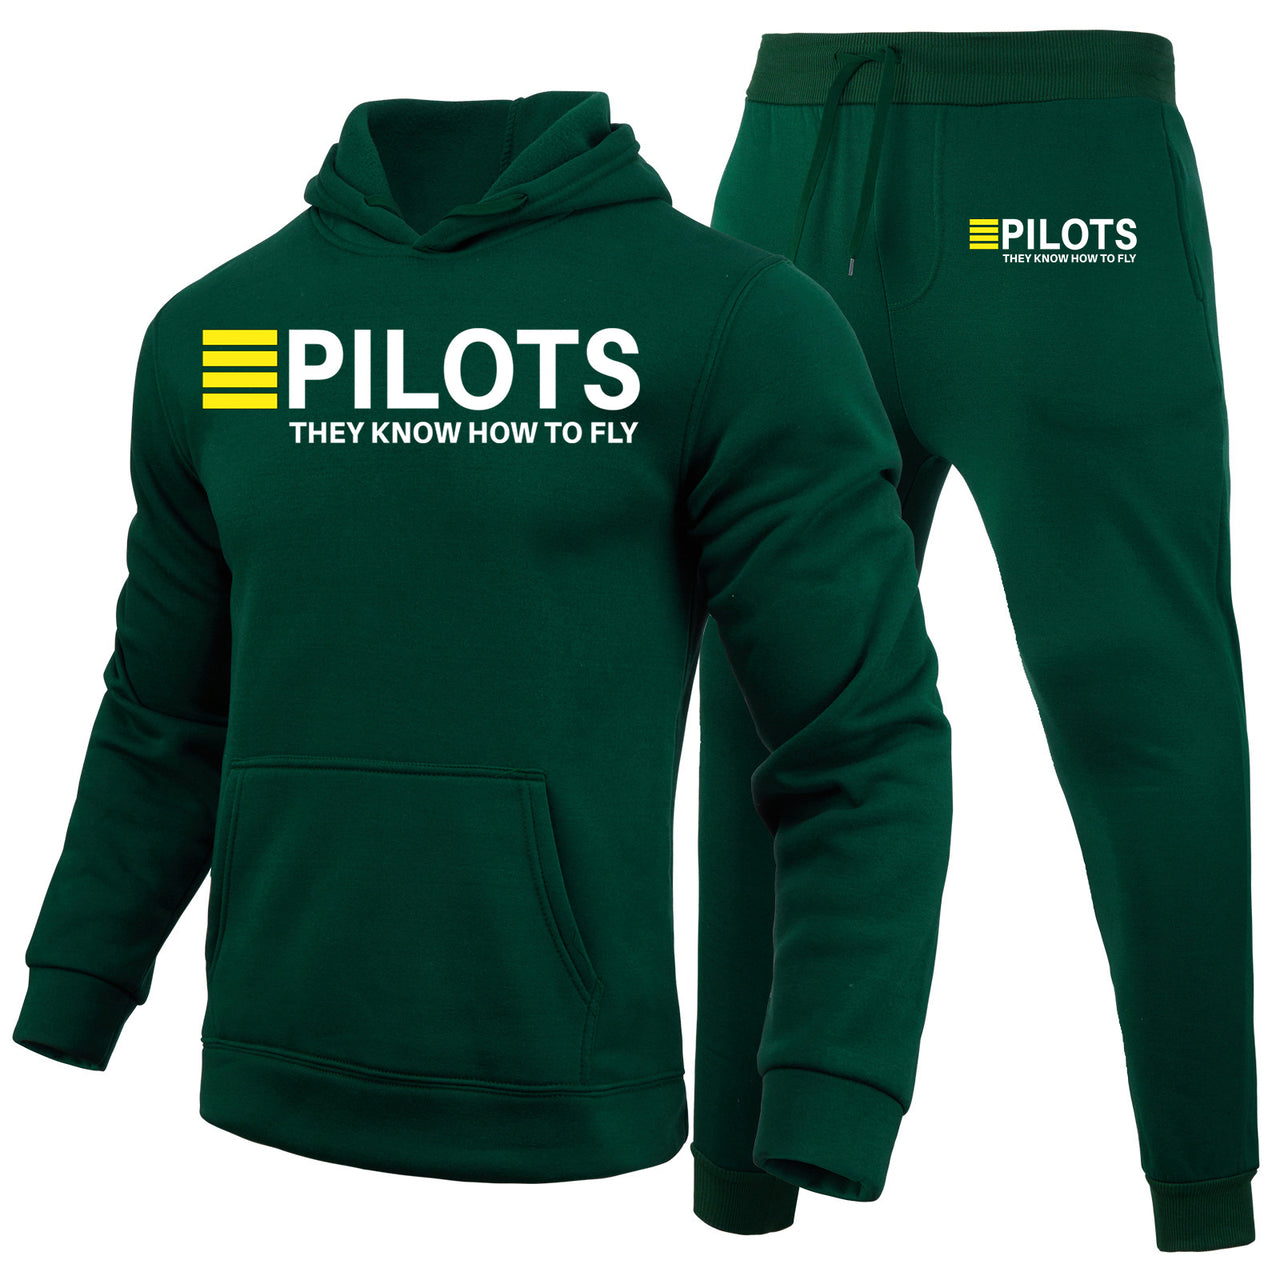 Pilots They Know How To Fly Designed Hoodies & Sweatpants Set